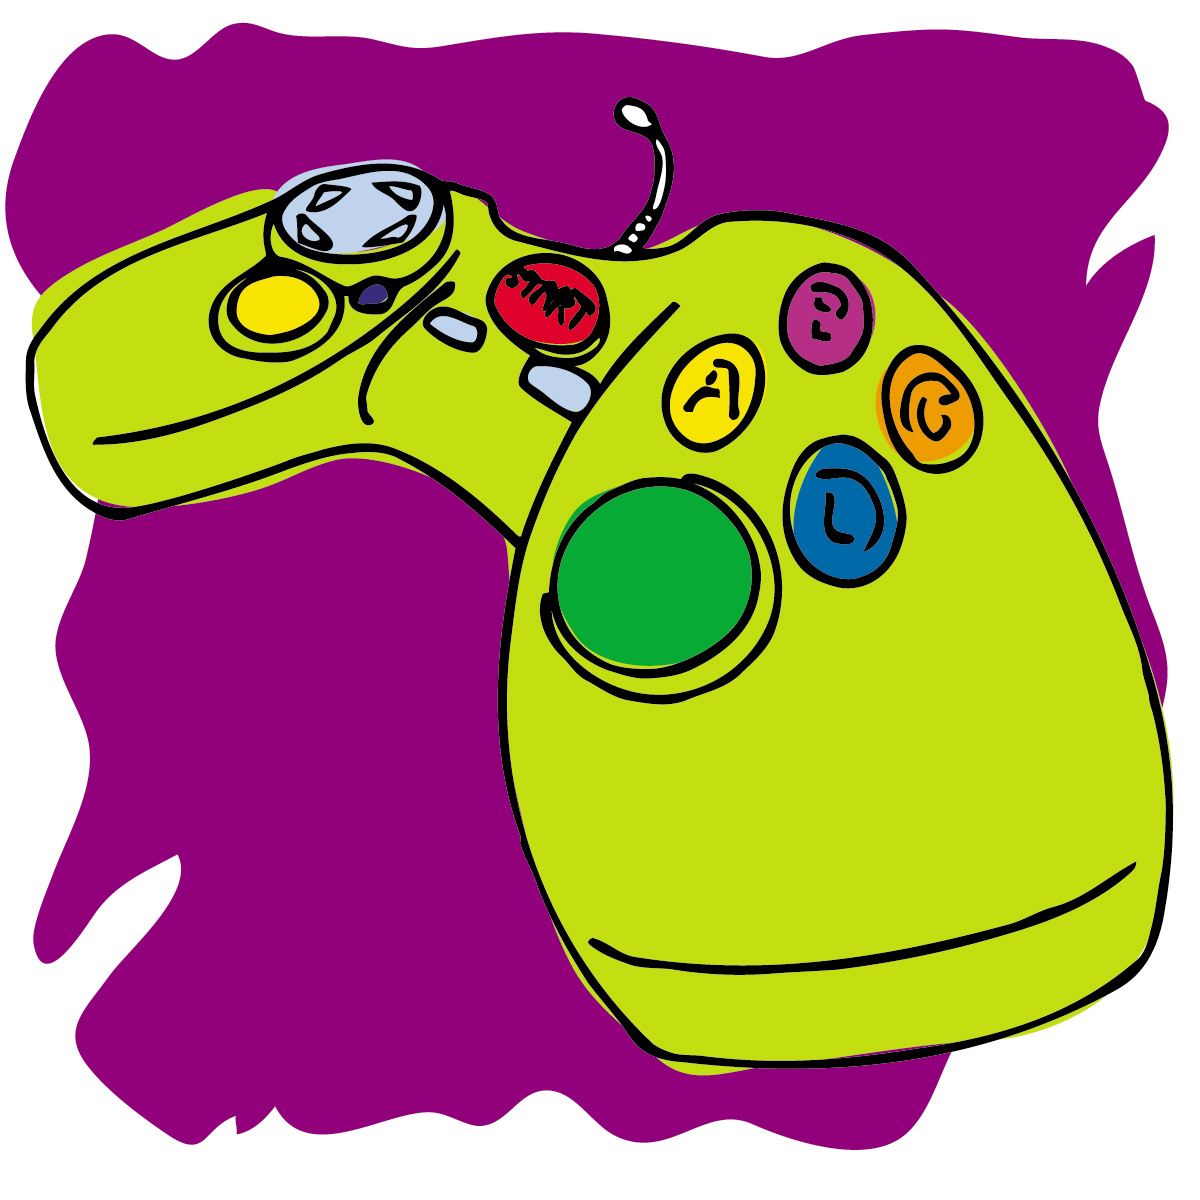 Clip Art: Game Controller | Clipart Panda - Free Clipart Images